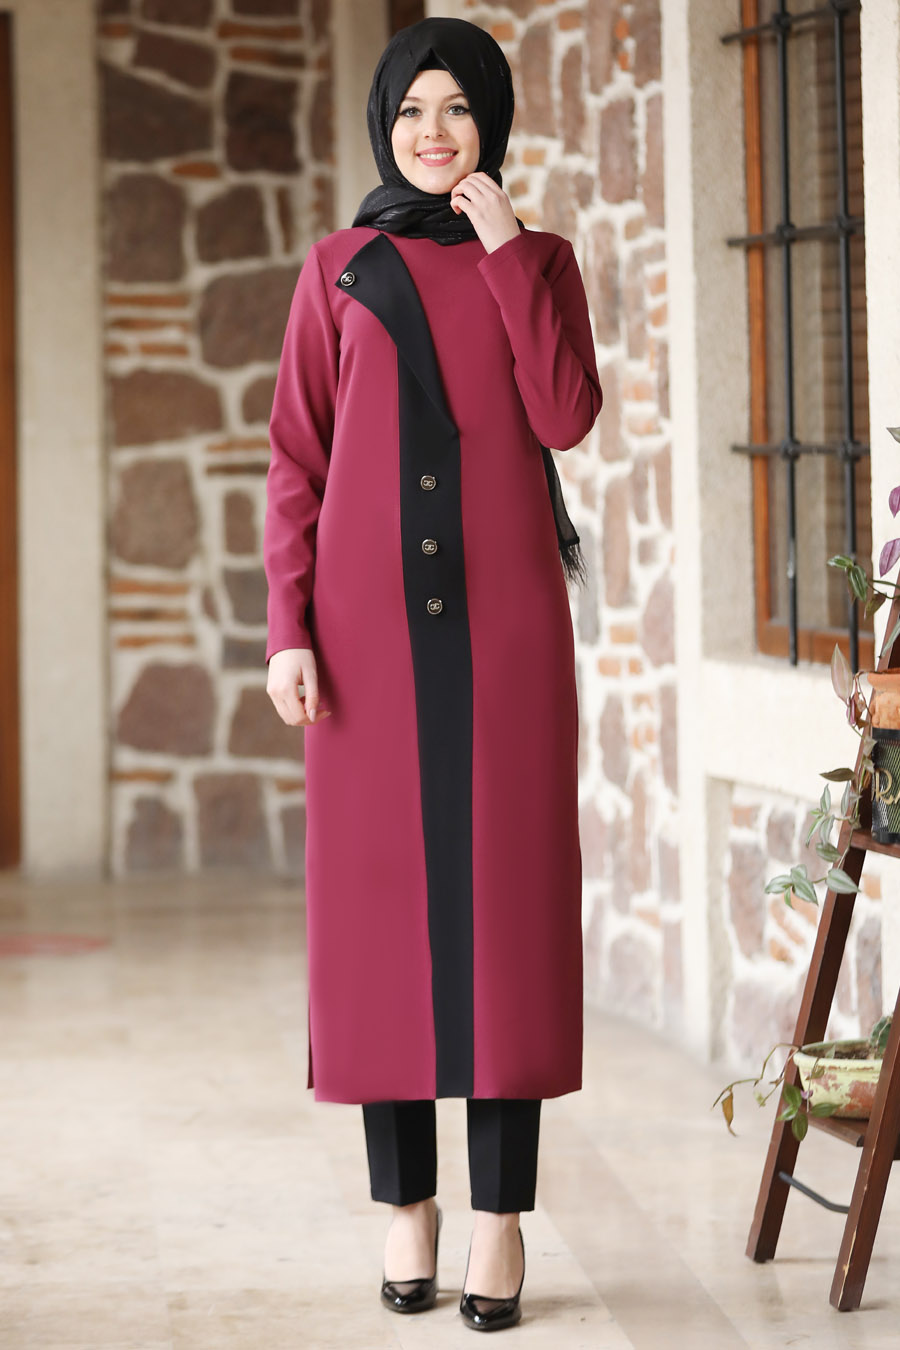 Tunic and Pant Suit - Plum